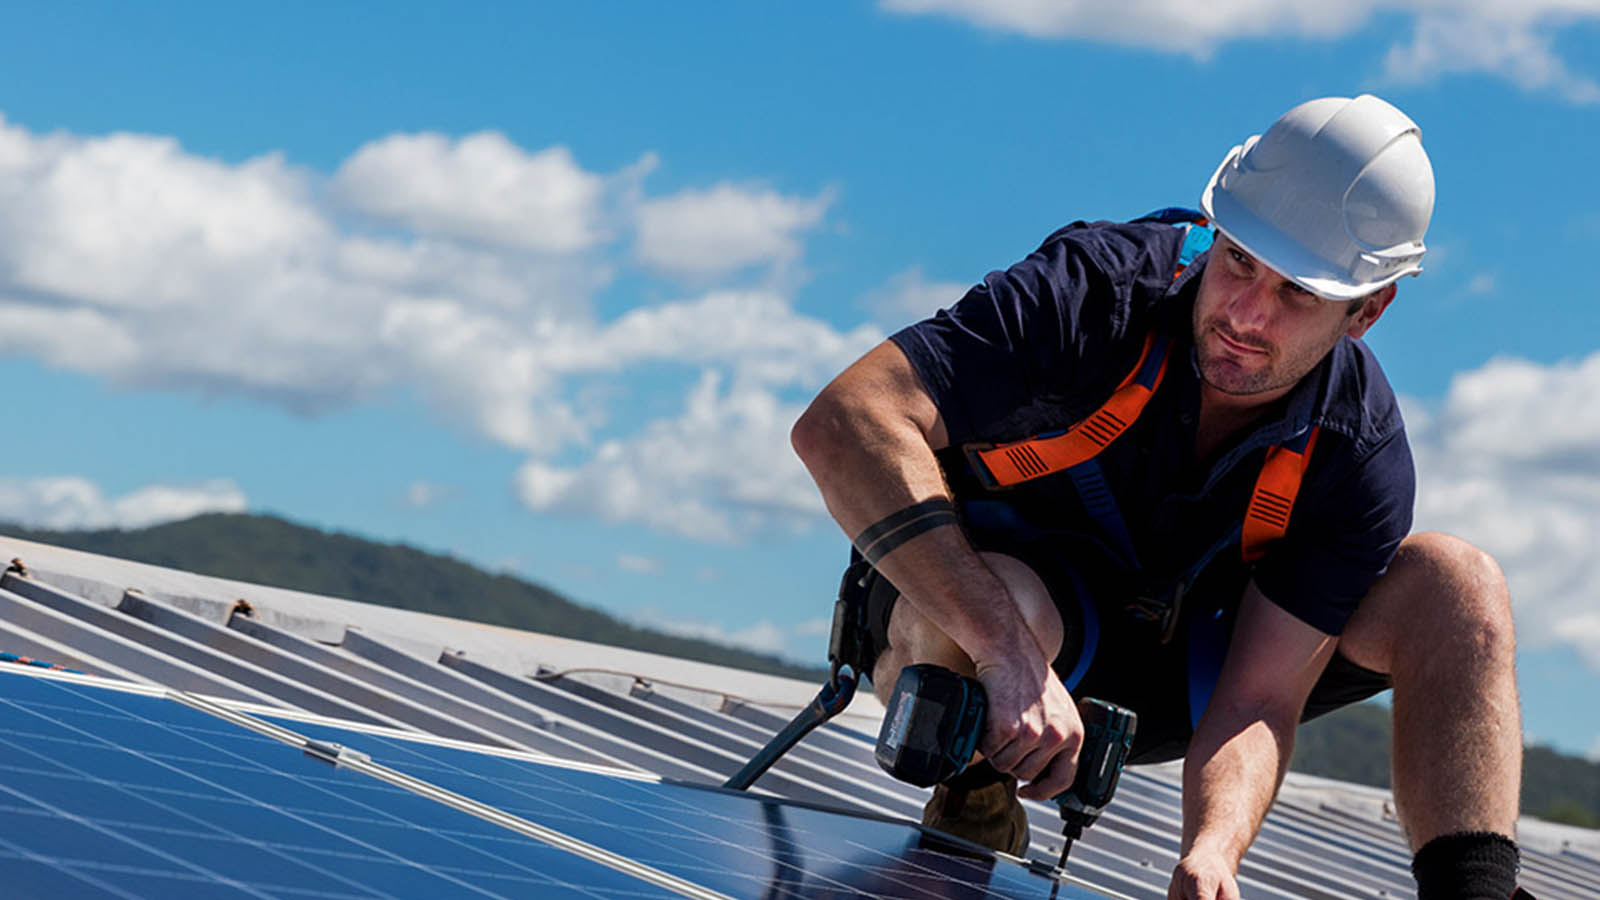 Tradesperson wearing PPE on a roof installing solar panelling with a drill.